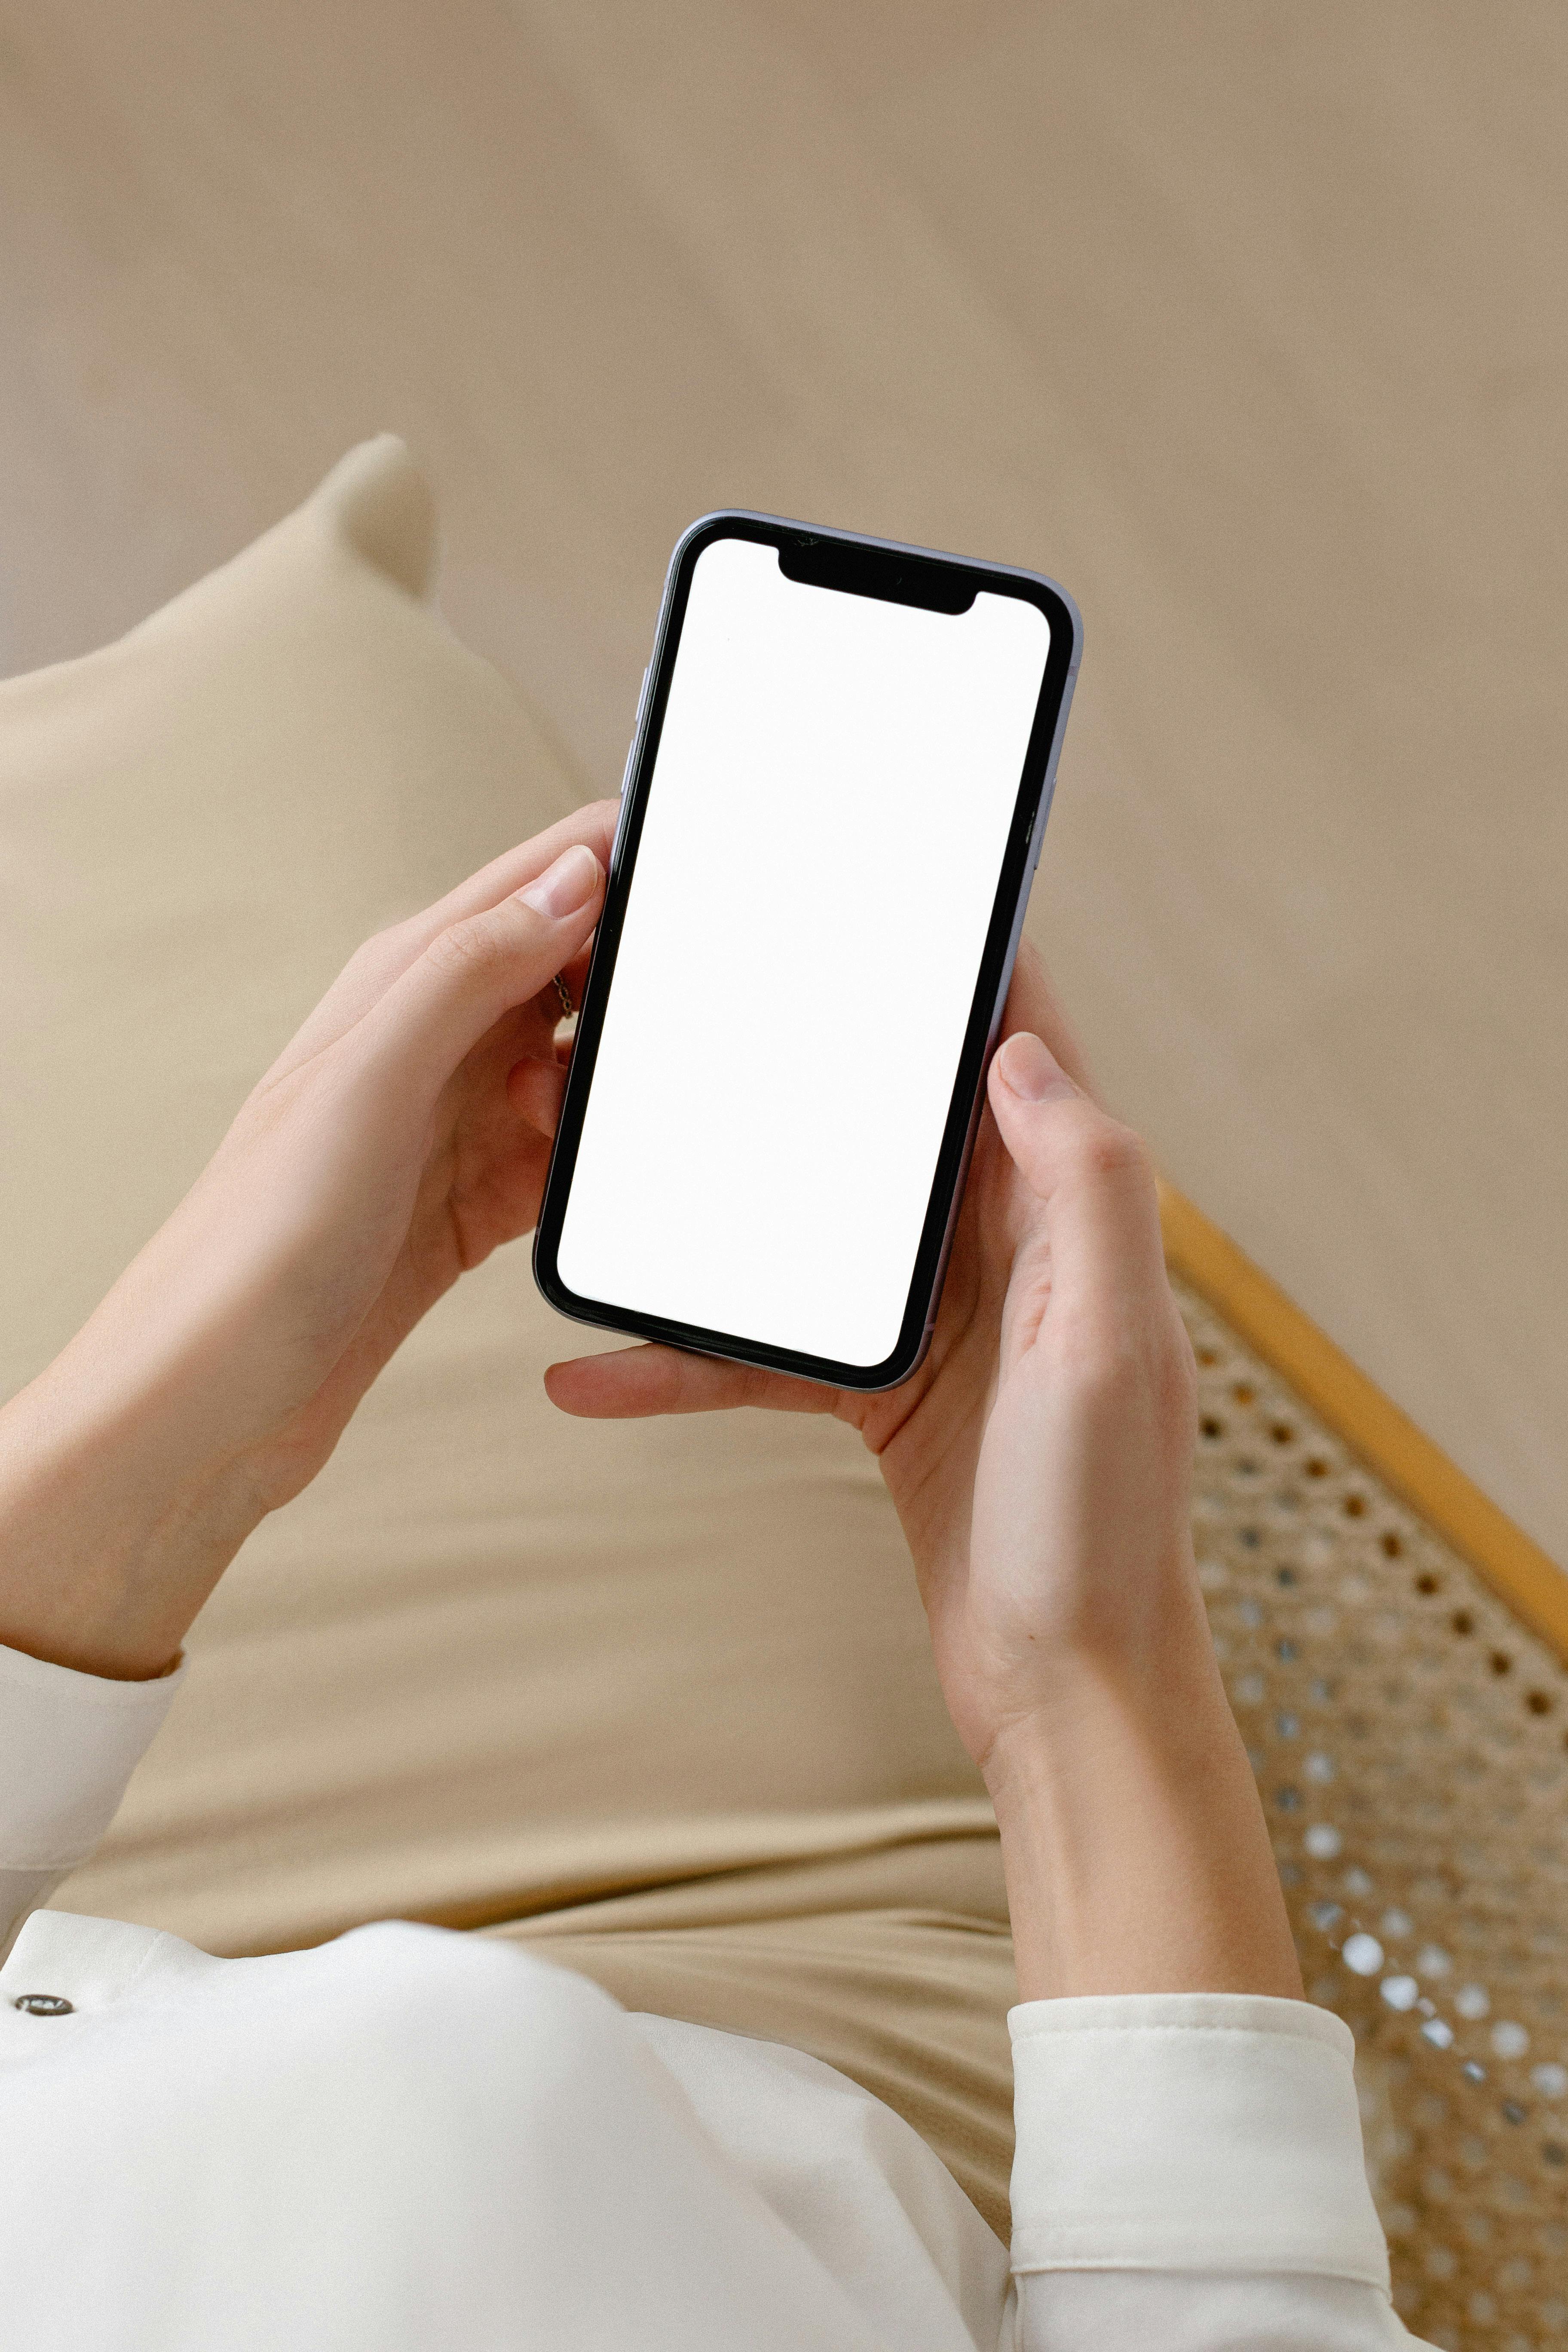 A woman holding up a phone displaying a blank screen | Source: Pexels